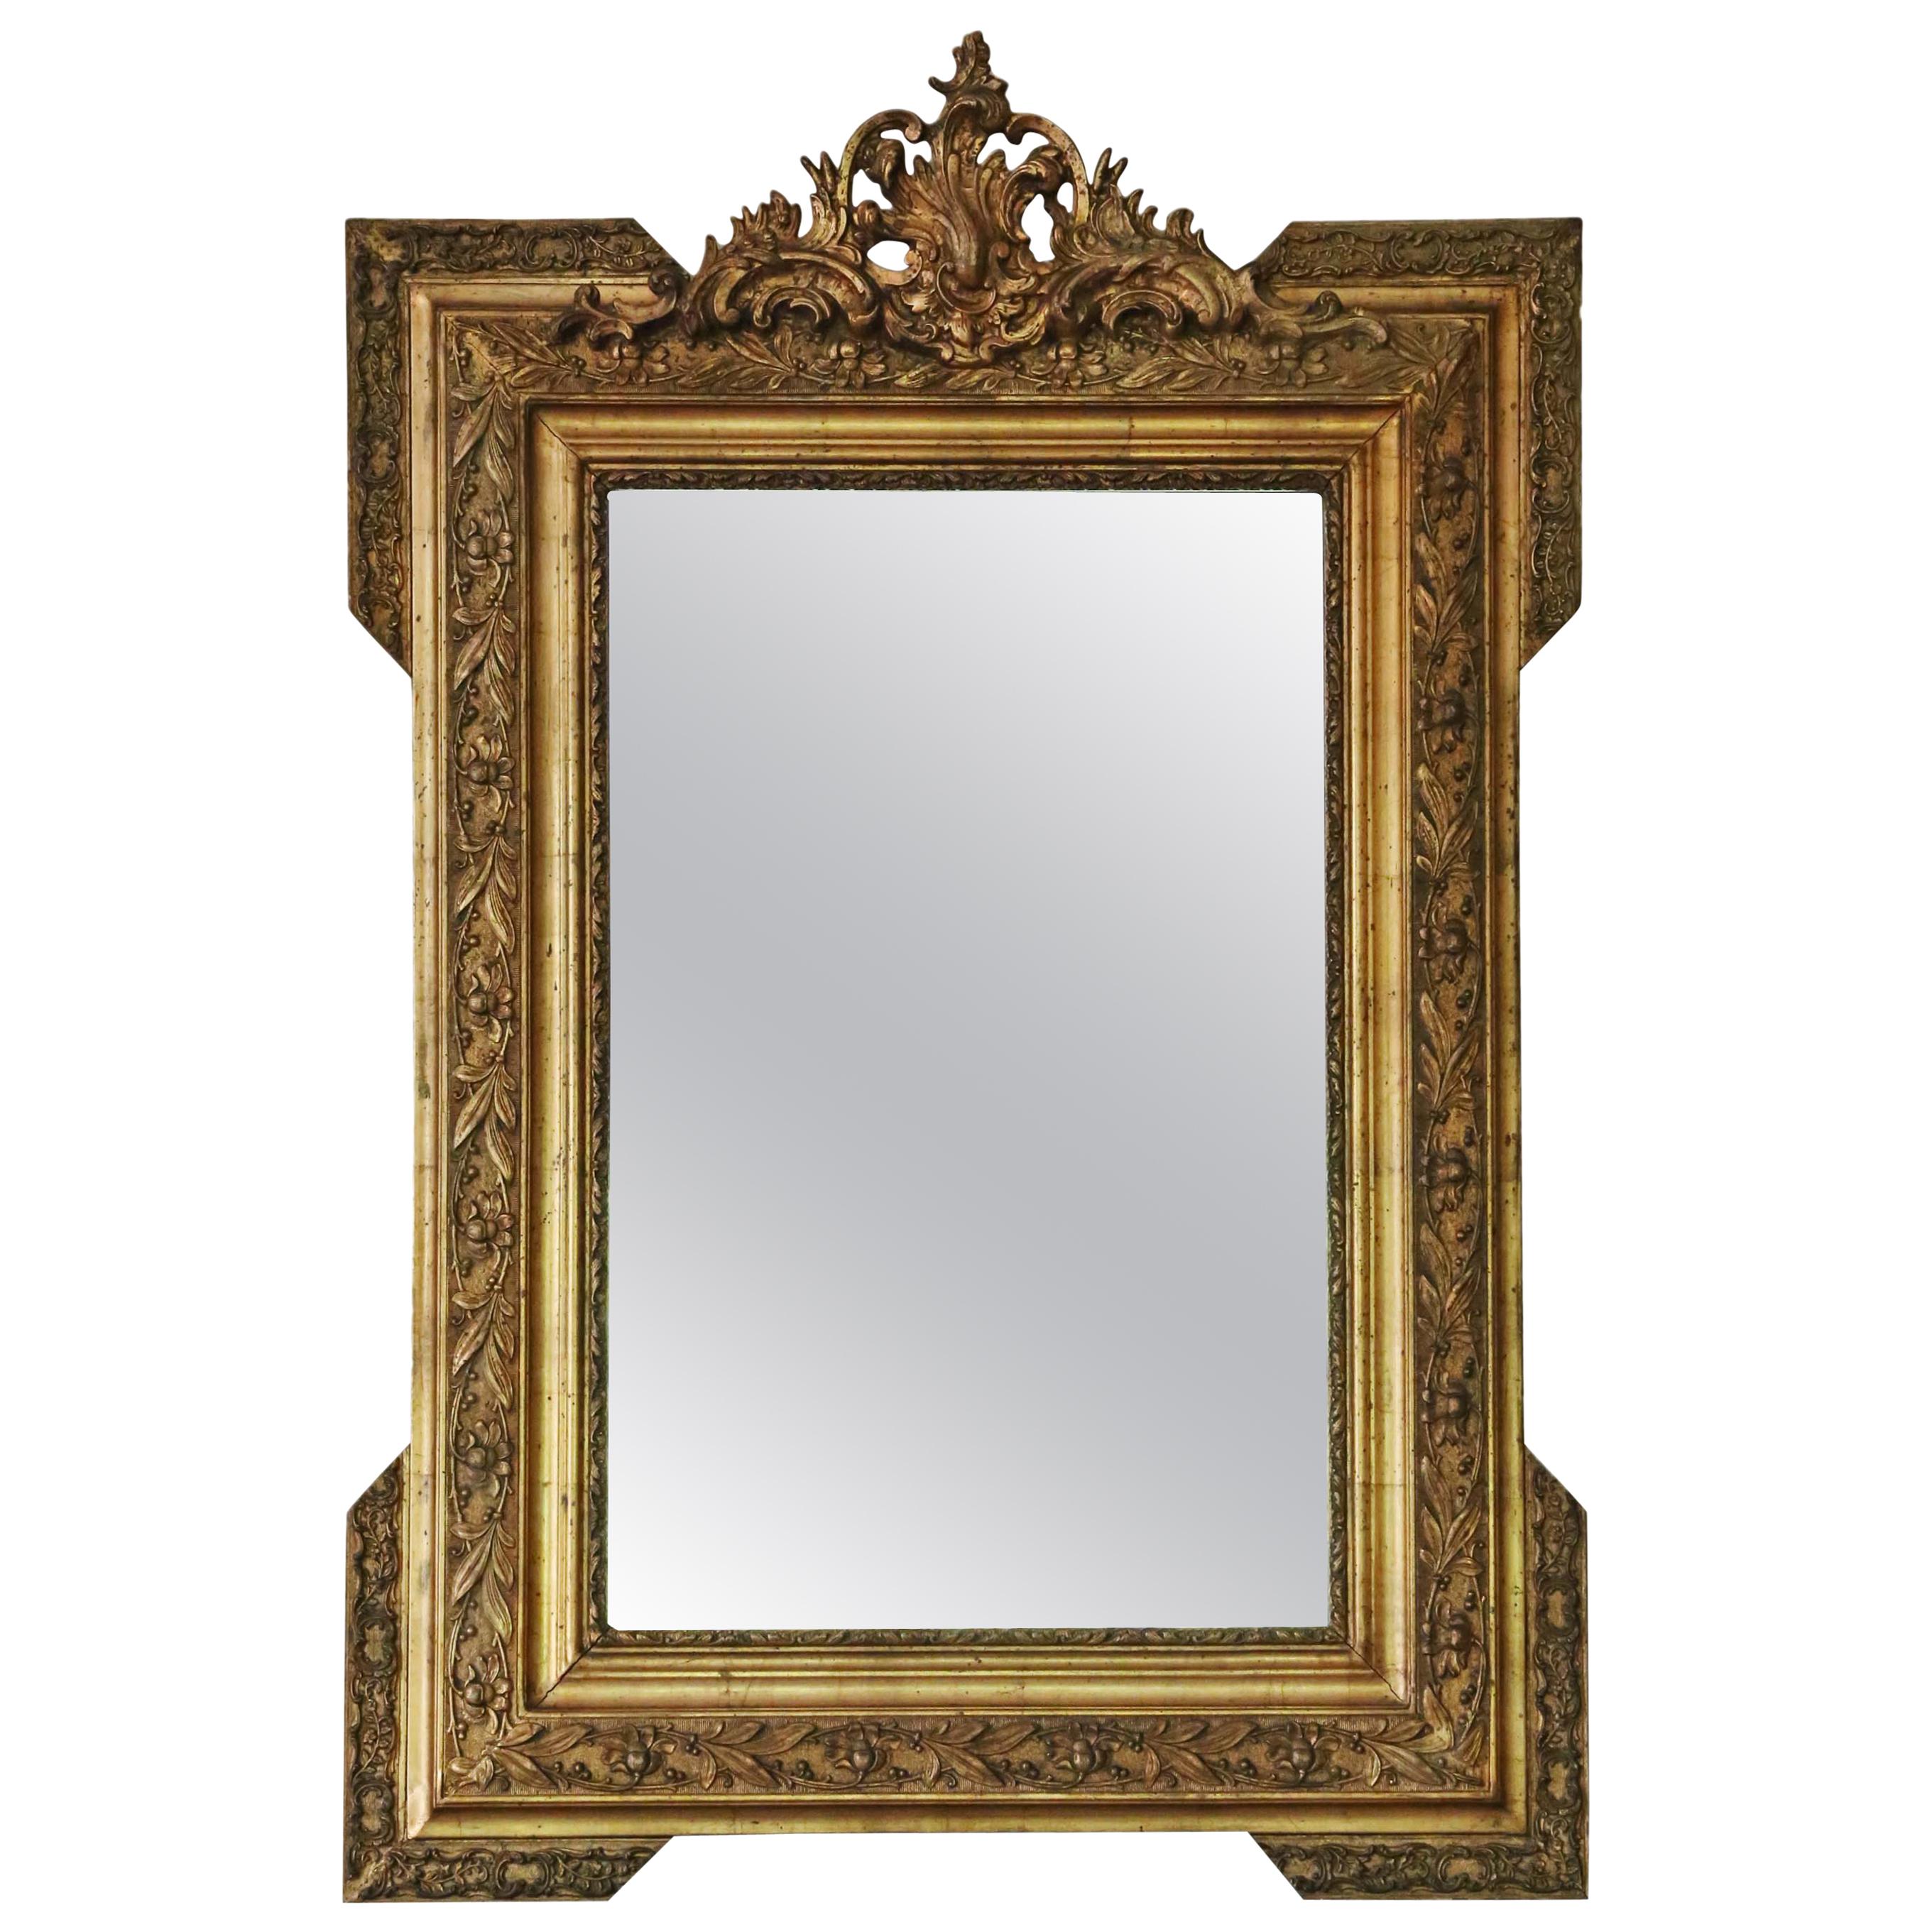 Antique Rare Fine Quality Gilt Overmantle or Wall Mirror, circa 1900 For Sale